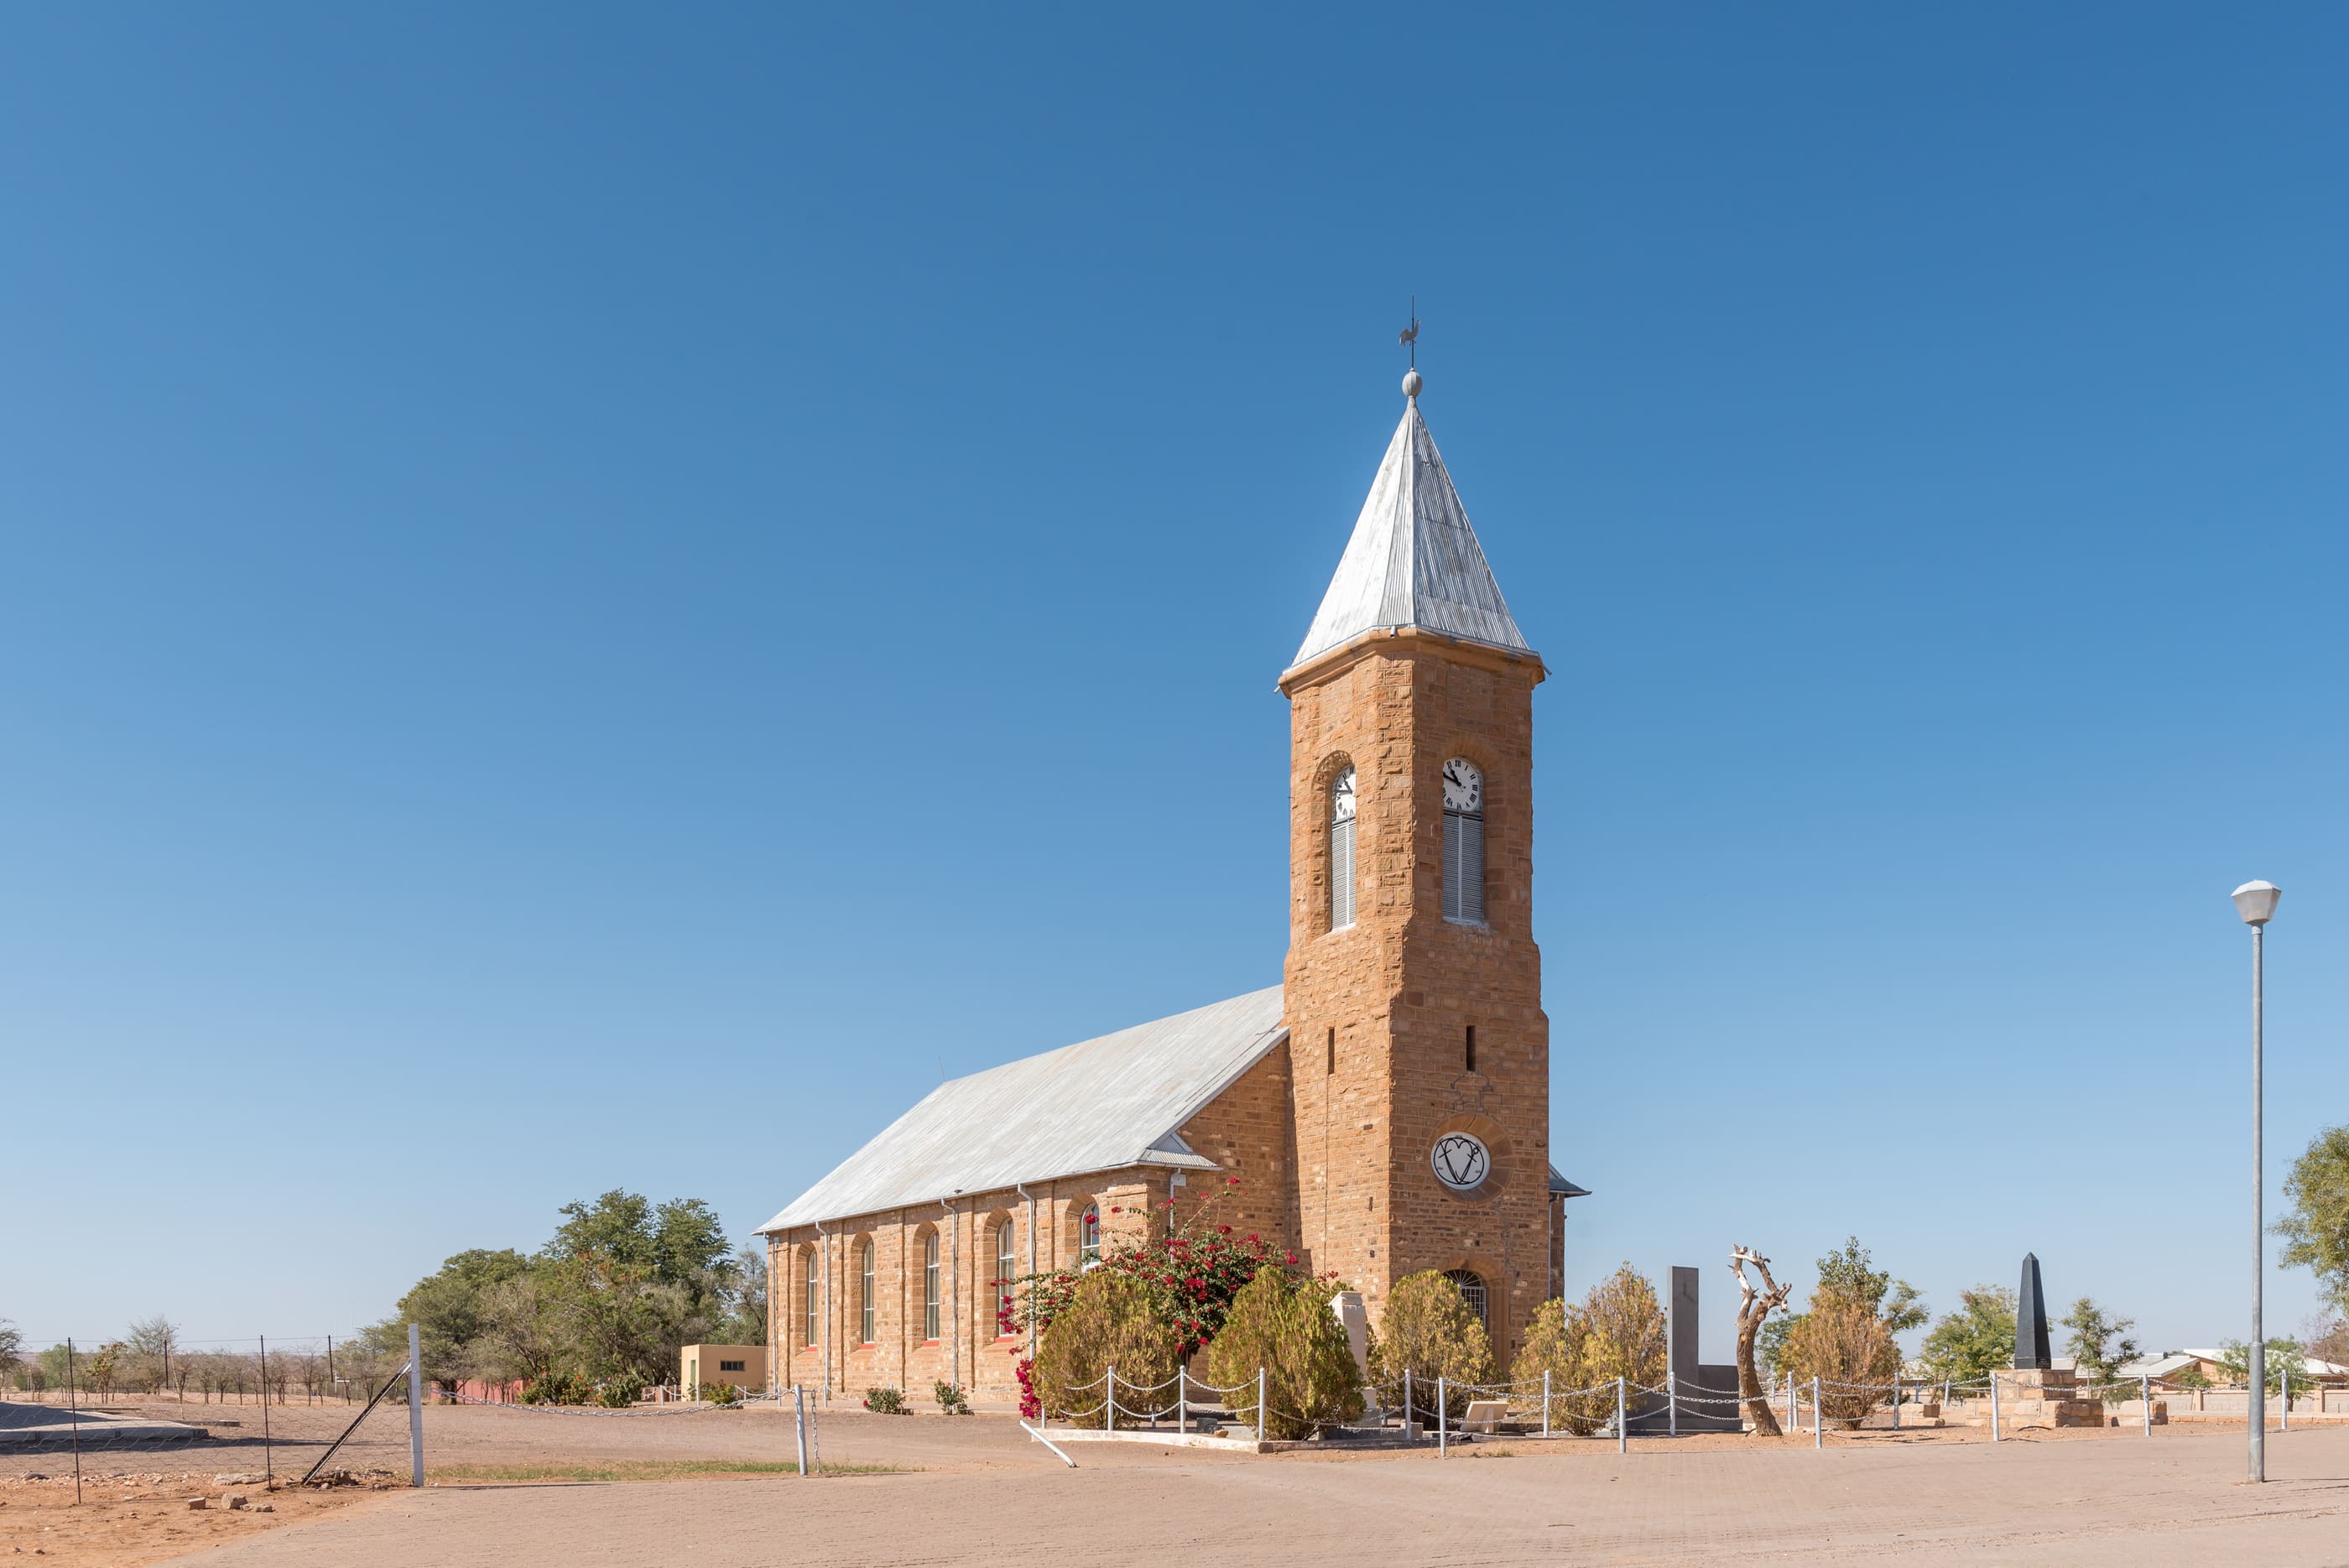 MARIENTAL, NAMIBIA - JUNE 14, 2017: The Dutch Reformed Church in Mariental, the capital town of the Hardap Region in Namibia